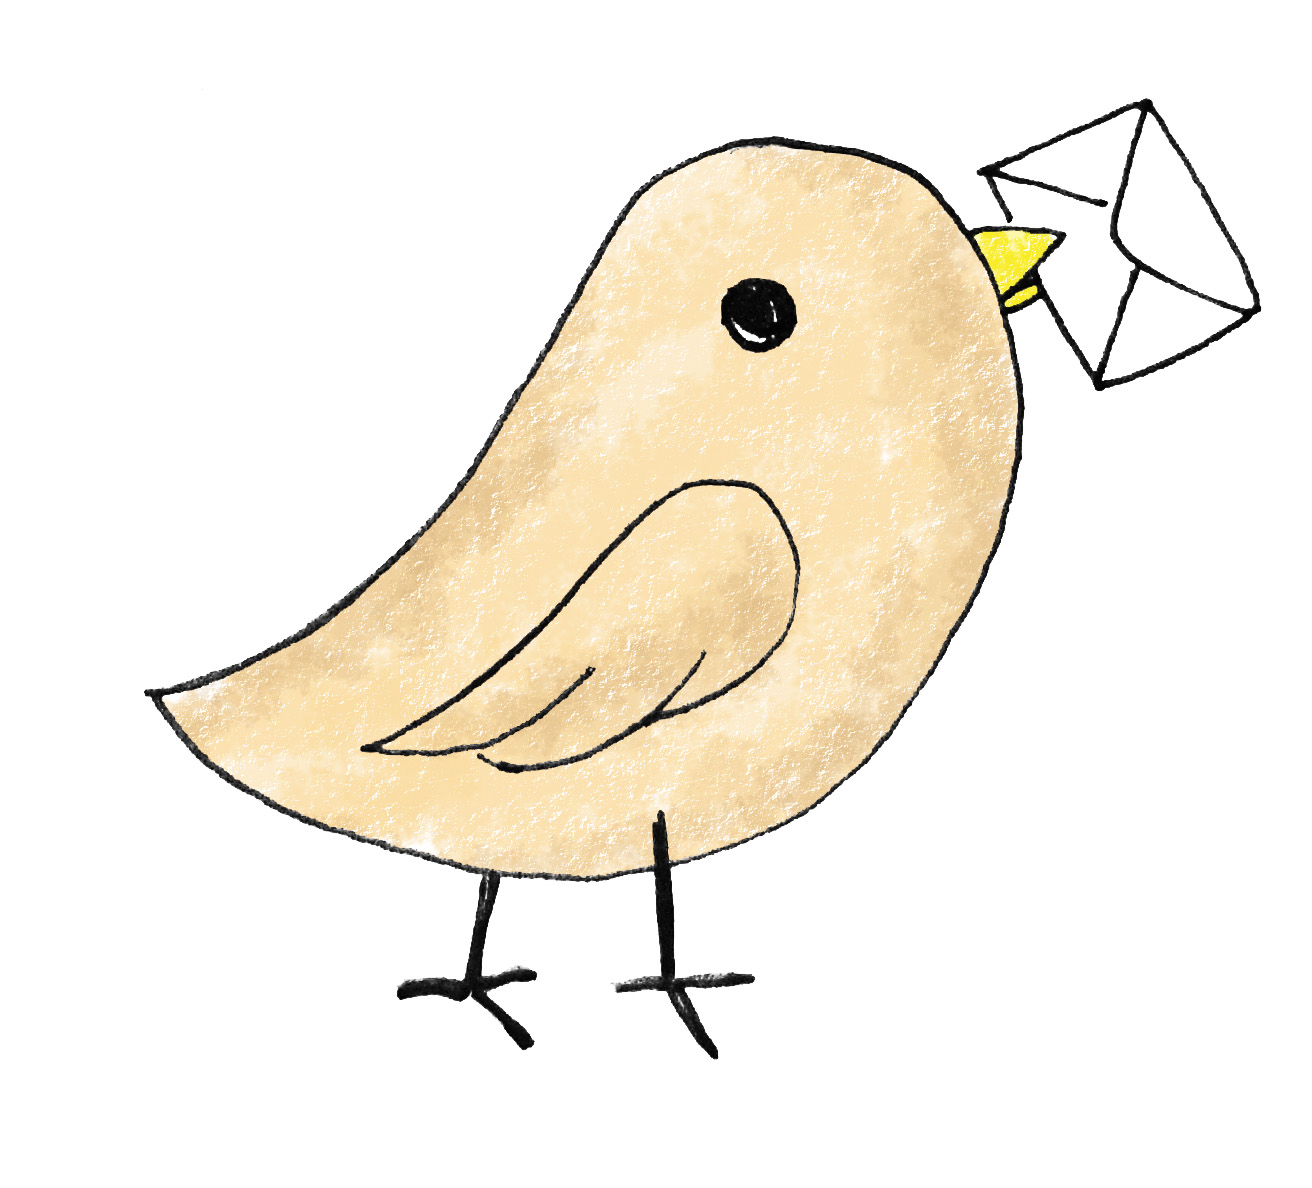 Envelope clipart formal letter. Bird carrying free images